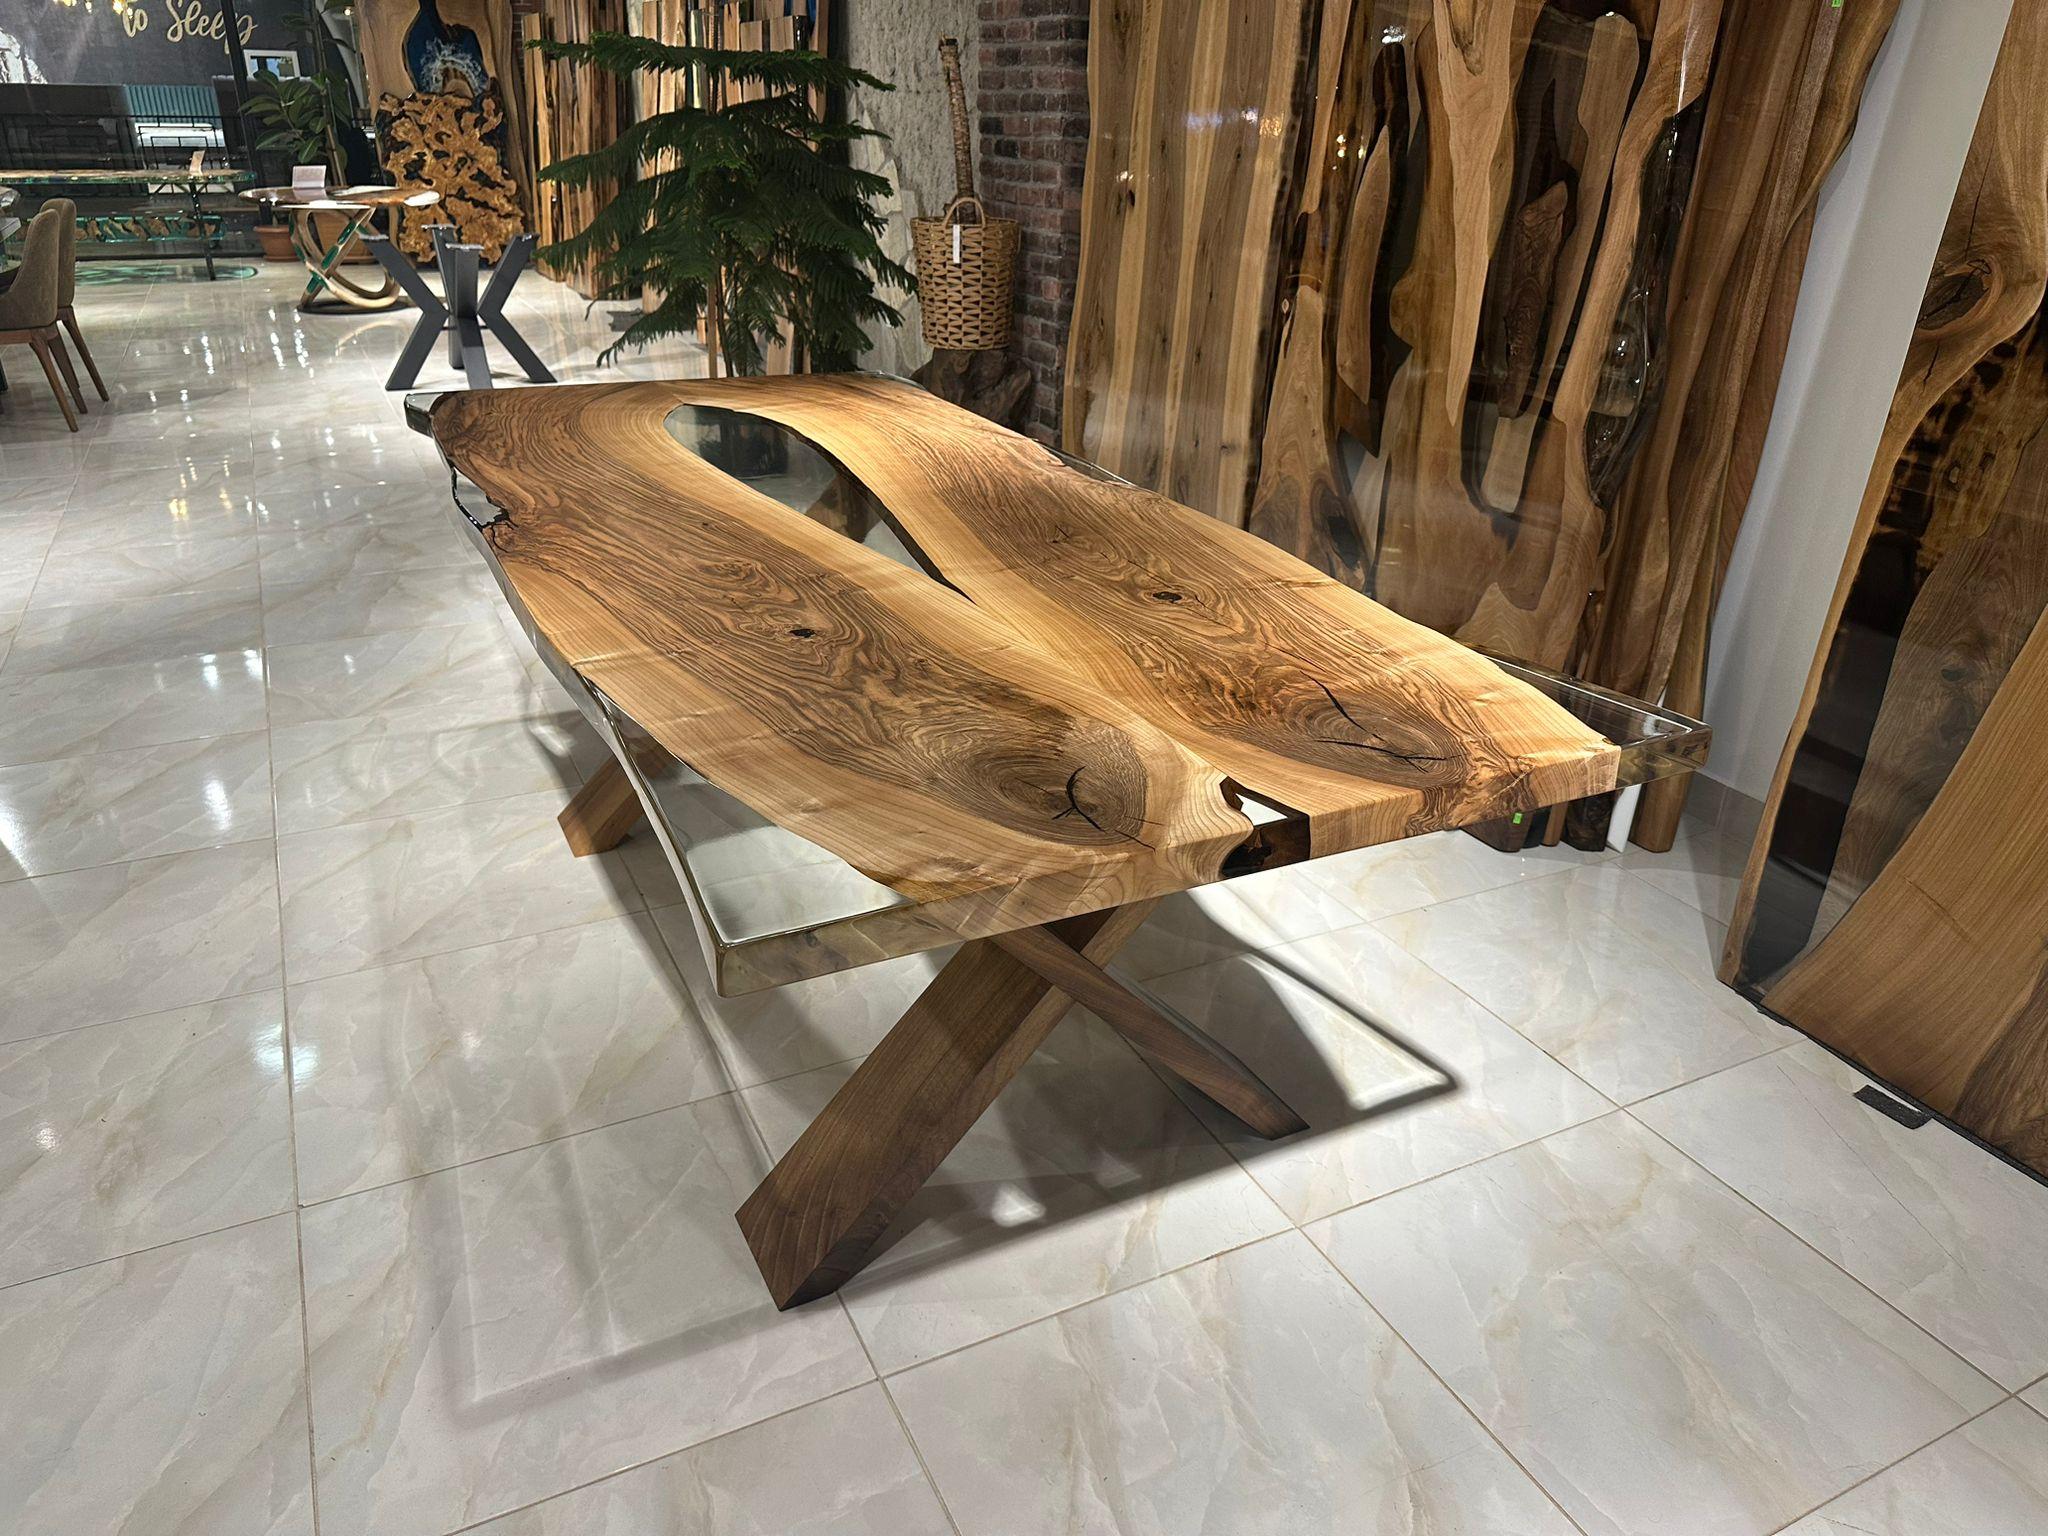 Clear Walnut Epoxy Resin Dining Table 

This table is made of Walnut Wood. The grains and texture of the wood describe what a natural walnut woods looks like.
It can be used as a dining table or as a conference table. Suitable for indoor use.

All